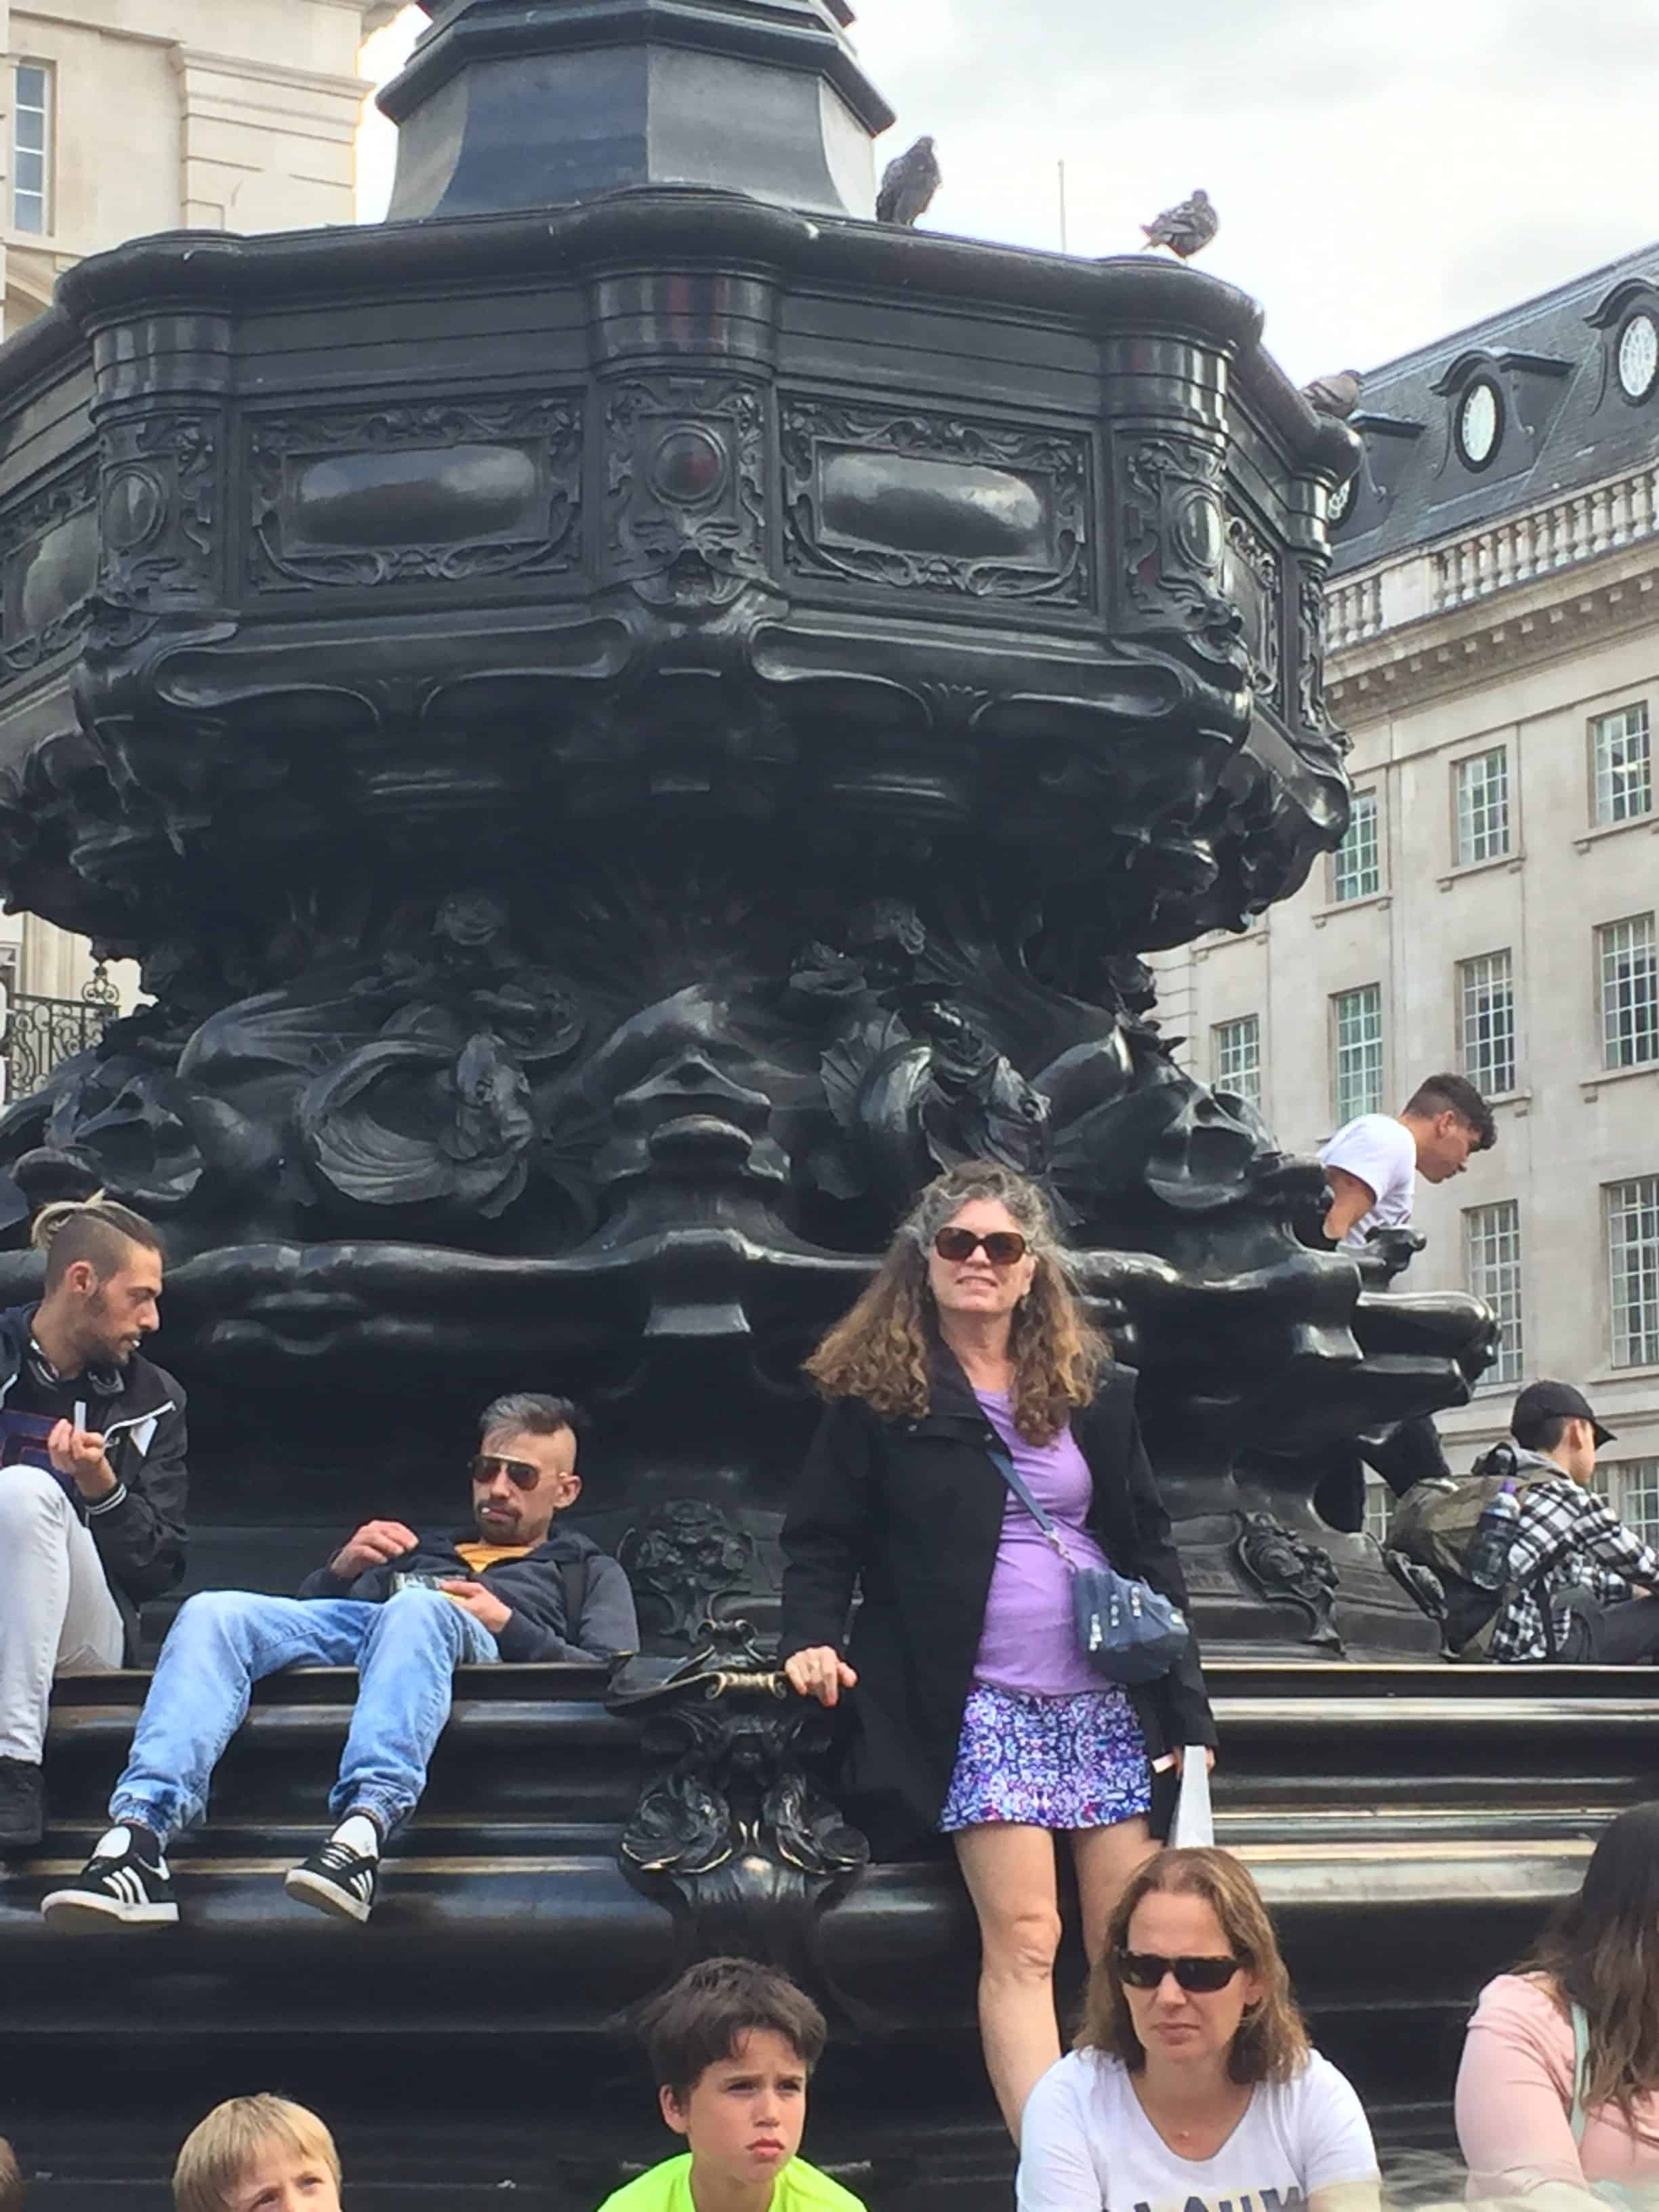 At fountain in Piccadilly Circus